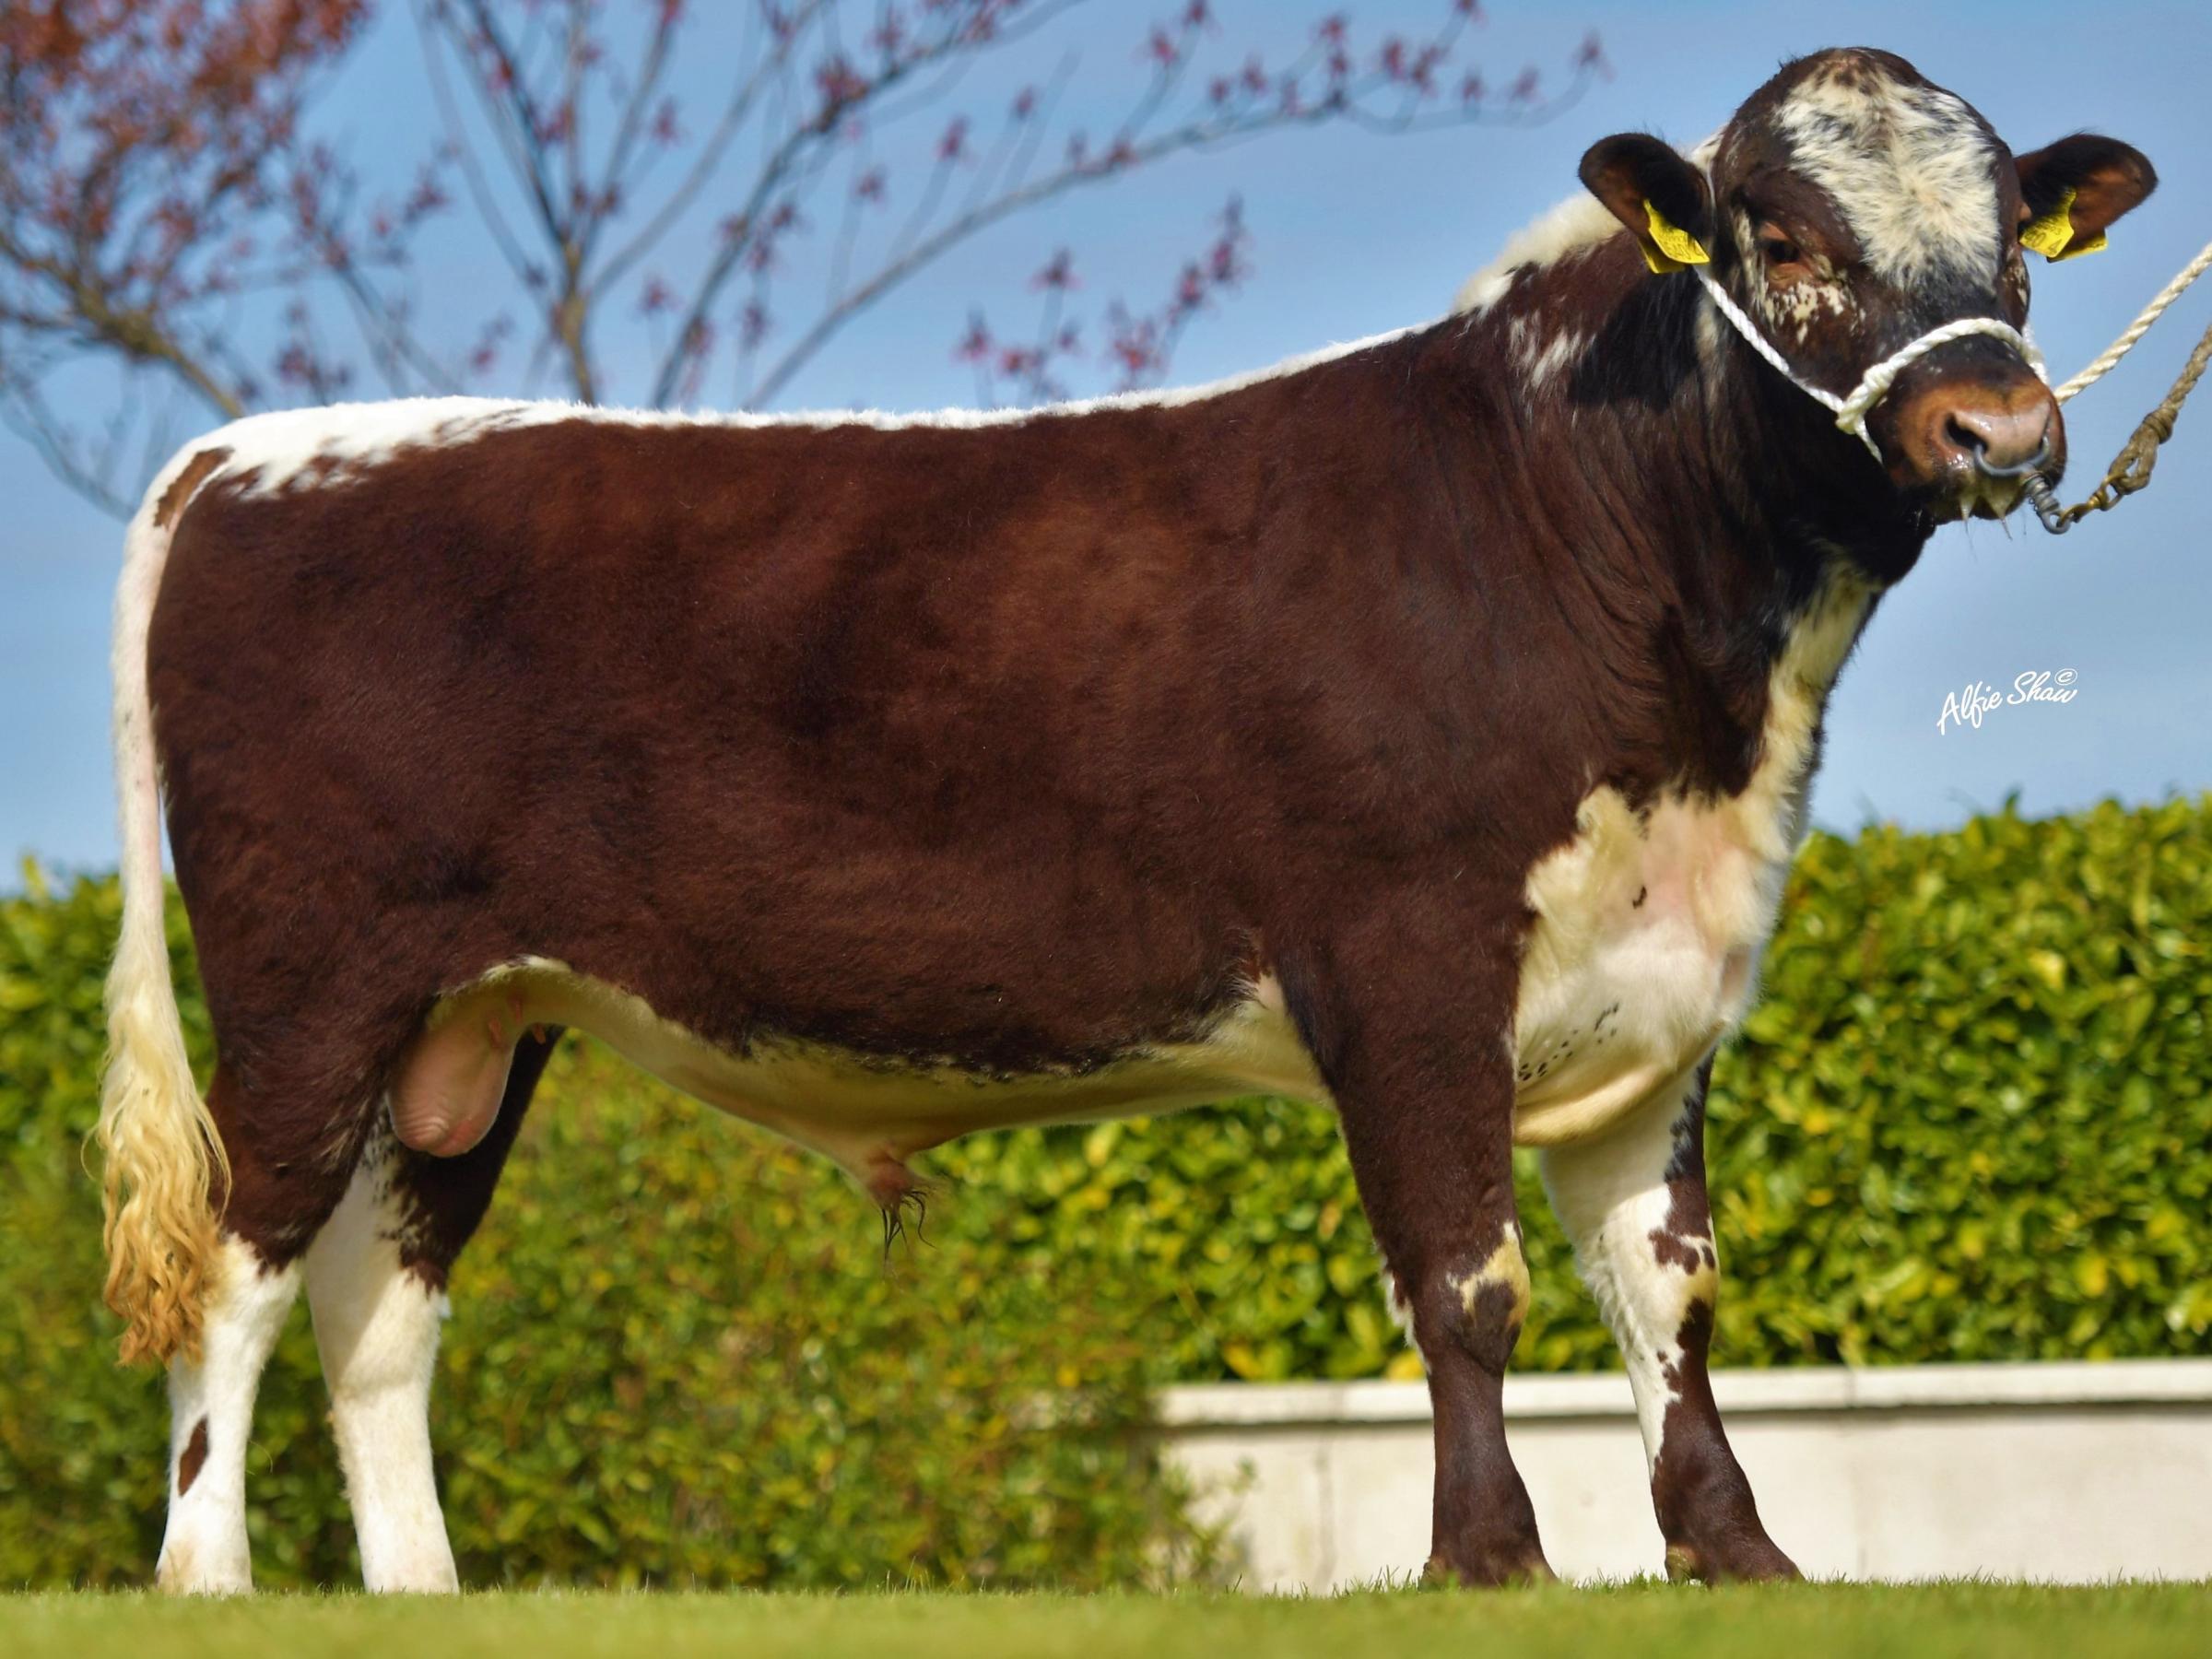 Top priced bull at £2600, Curraghnakeely Gypsy King, from N and M Moilies